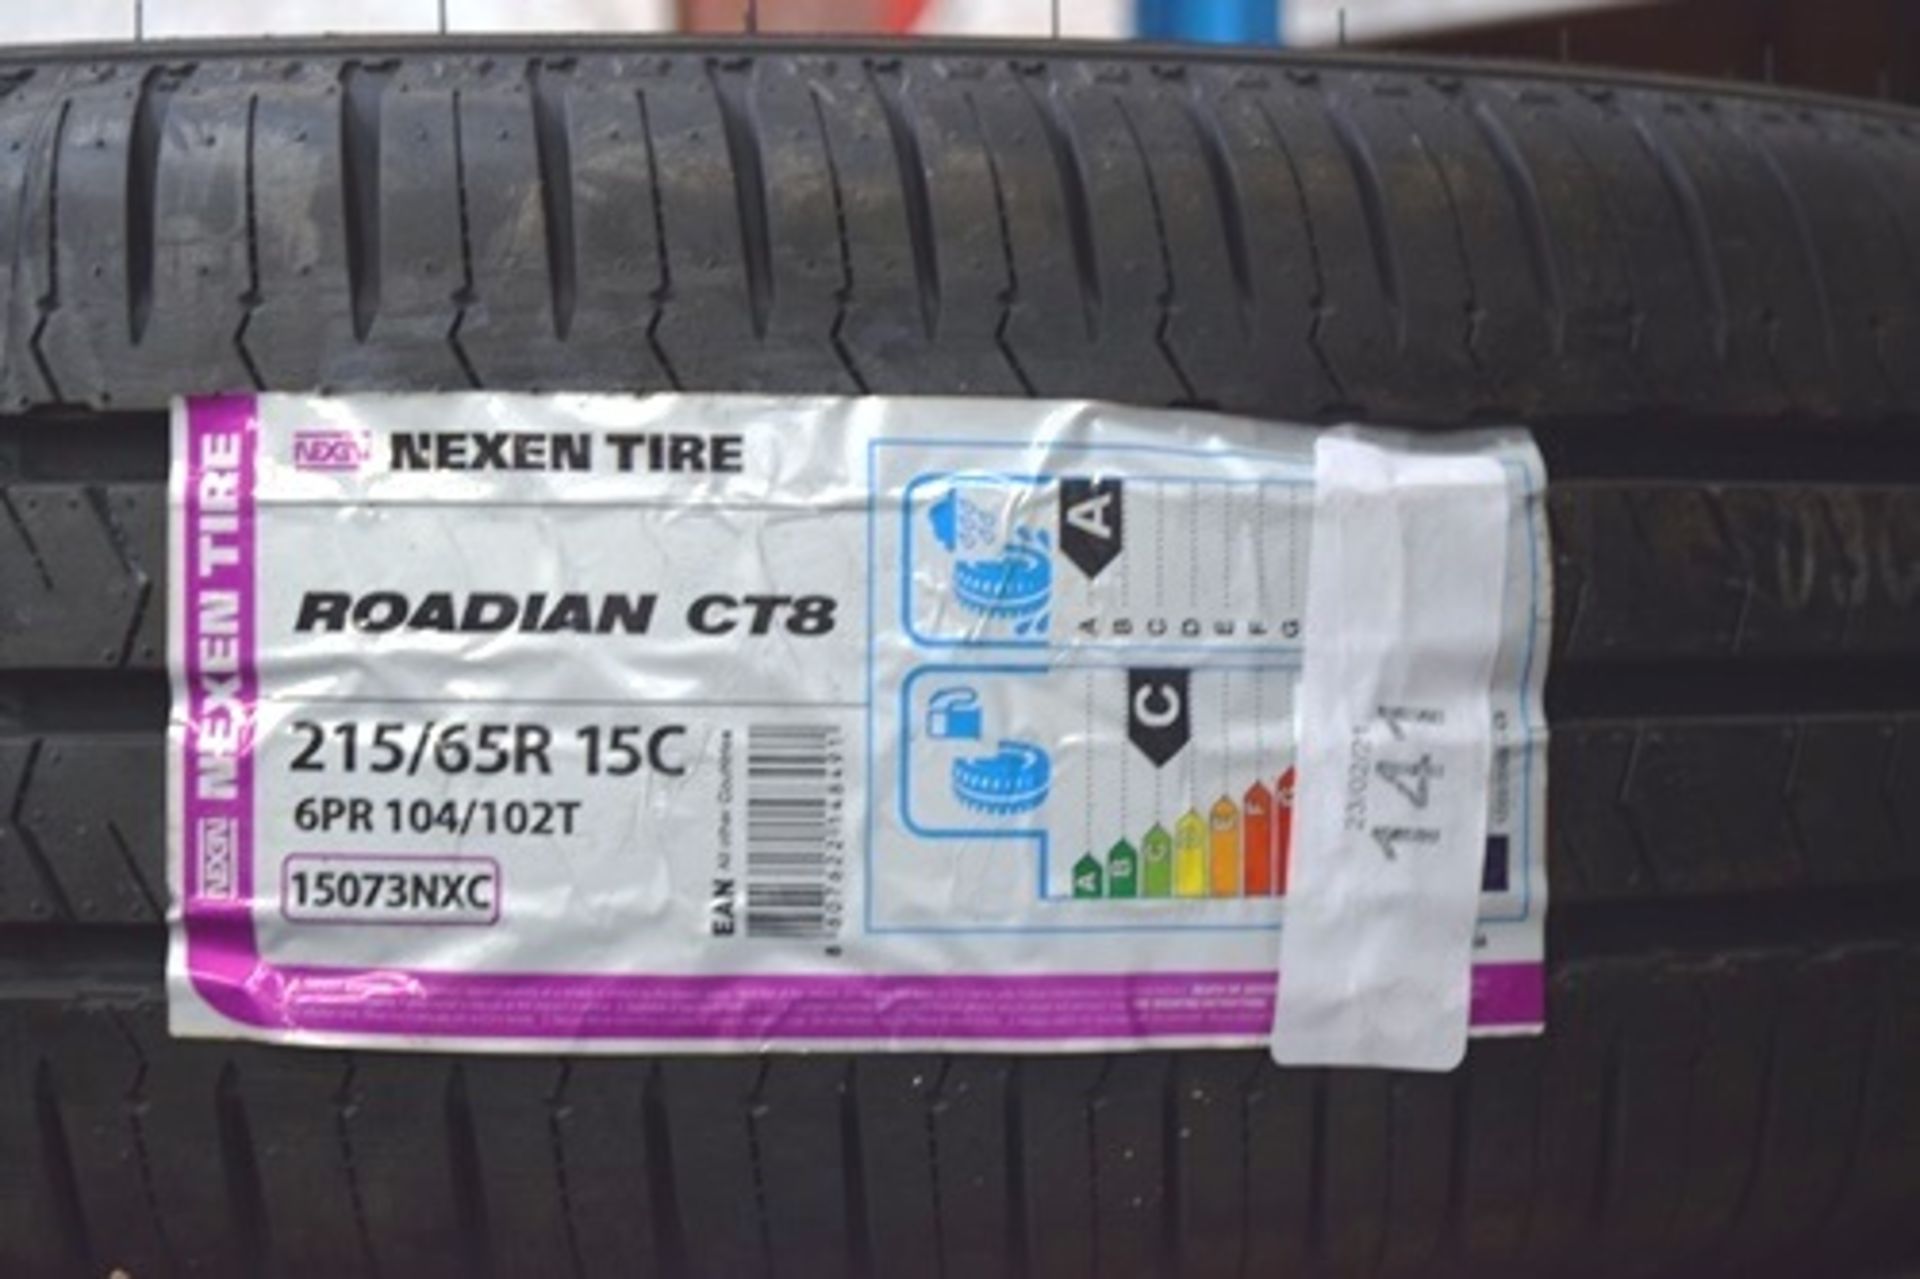 1 x Nexen Roadian CT8 15073NXL tyre, size 215/65R 15C - New with label (GS12)